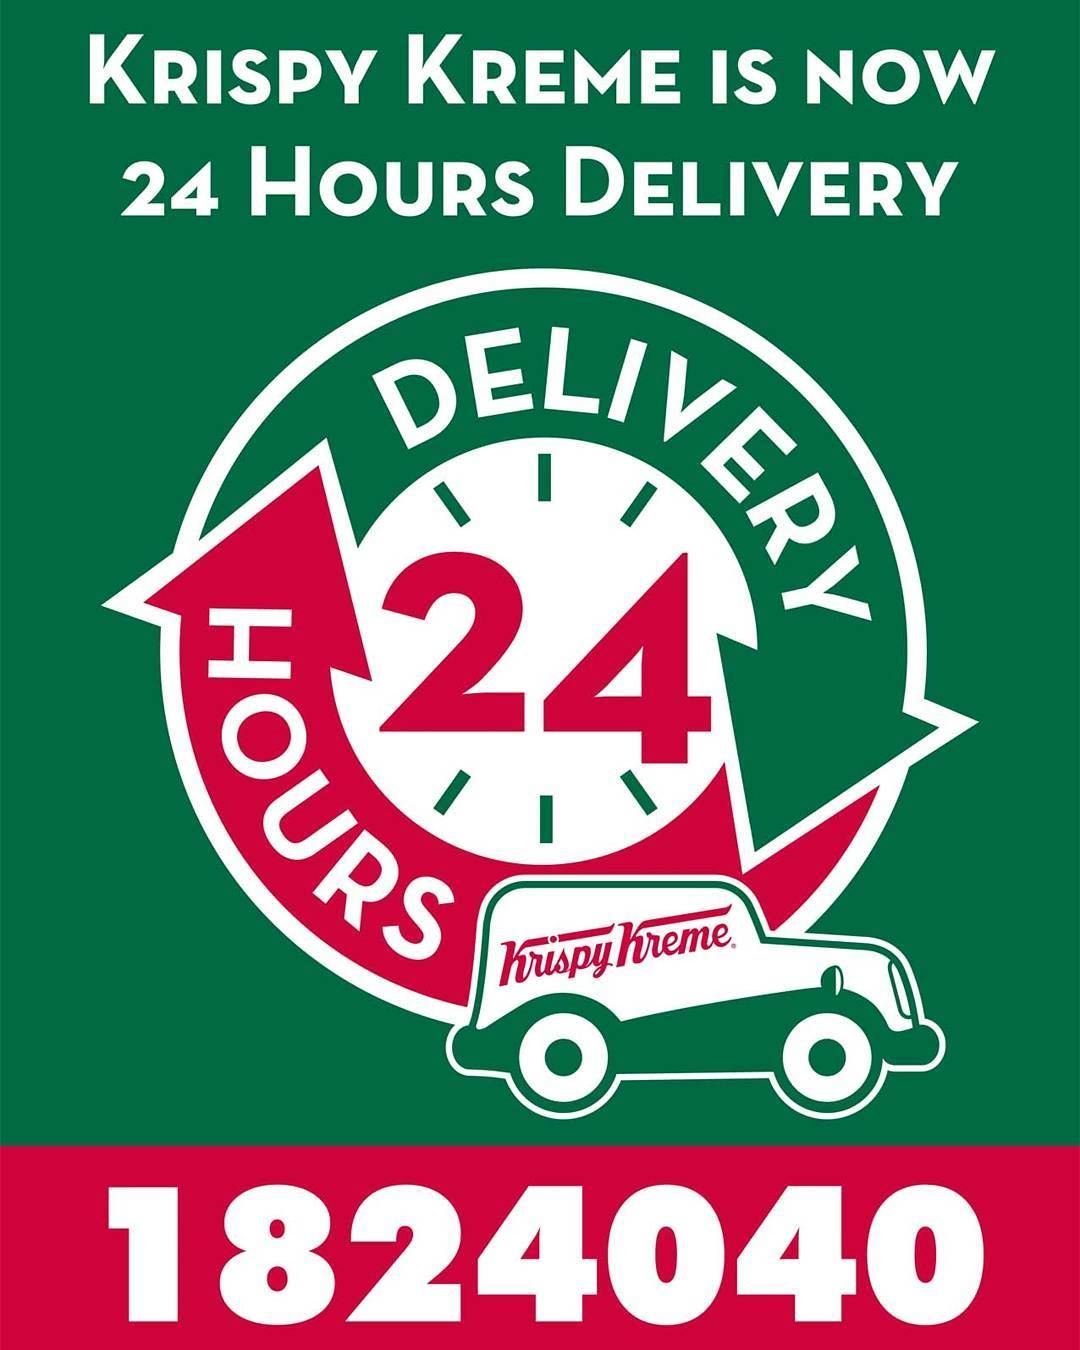 Krispy Kreme Delivery Service is now 24 hours